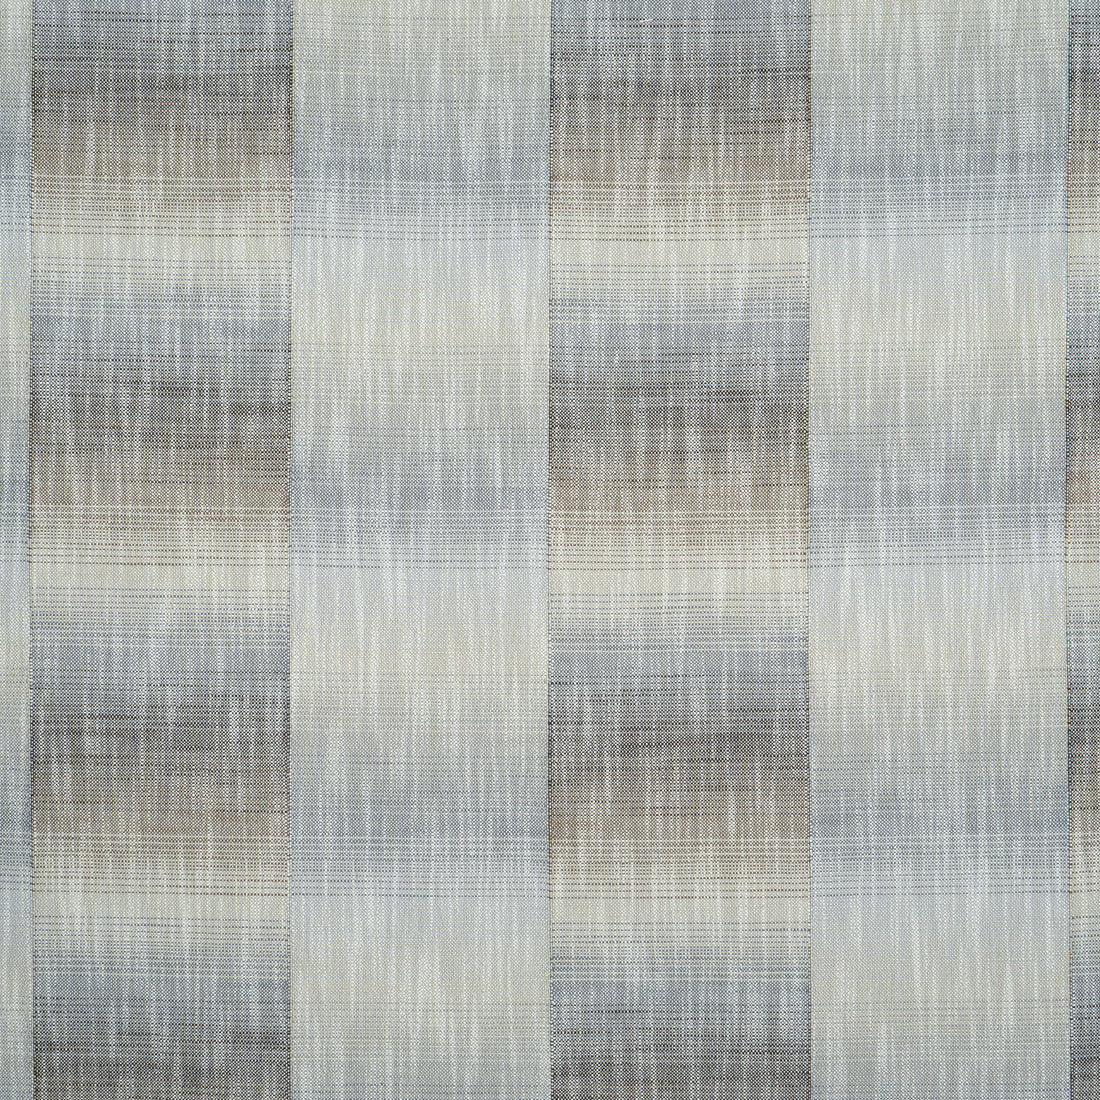 Big Sky fabric in desert color - pattern number W78320 - by Thibaut in the  Sierra collection